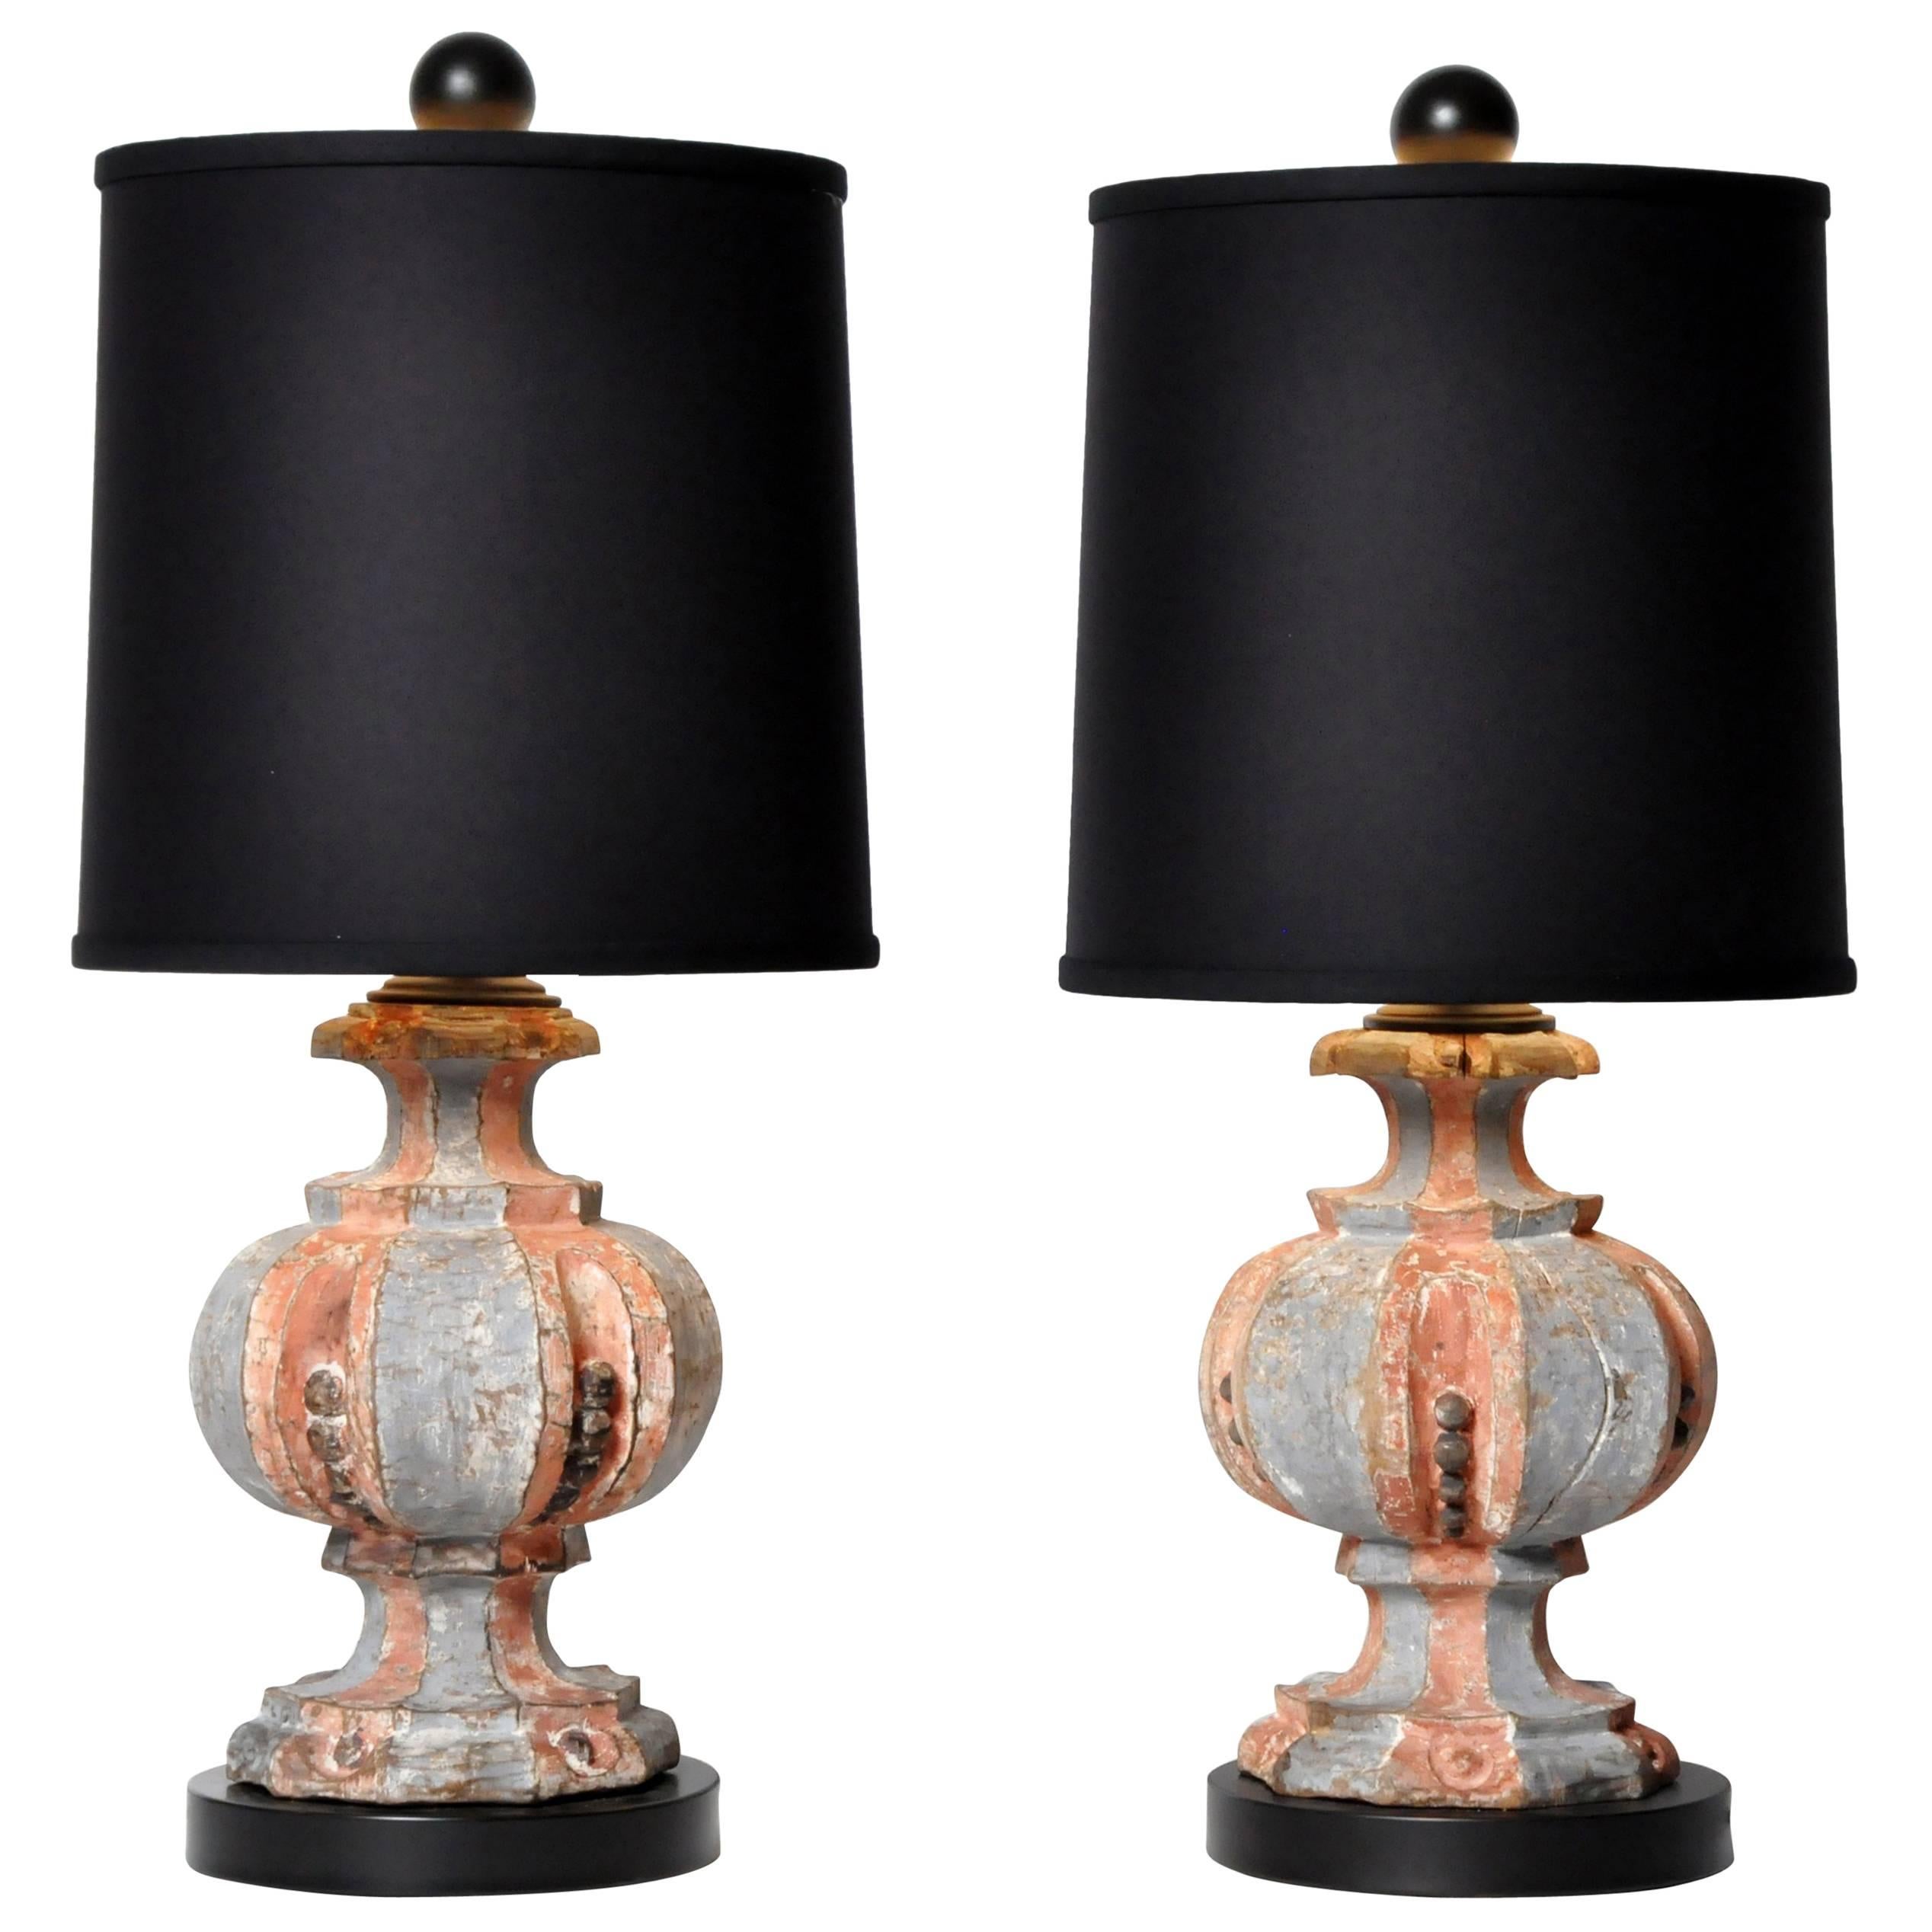 Pair of Wooden Finials Lamps